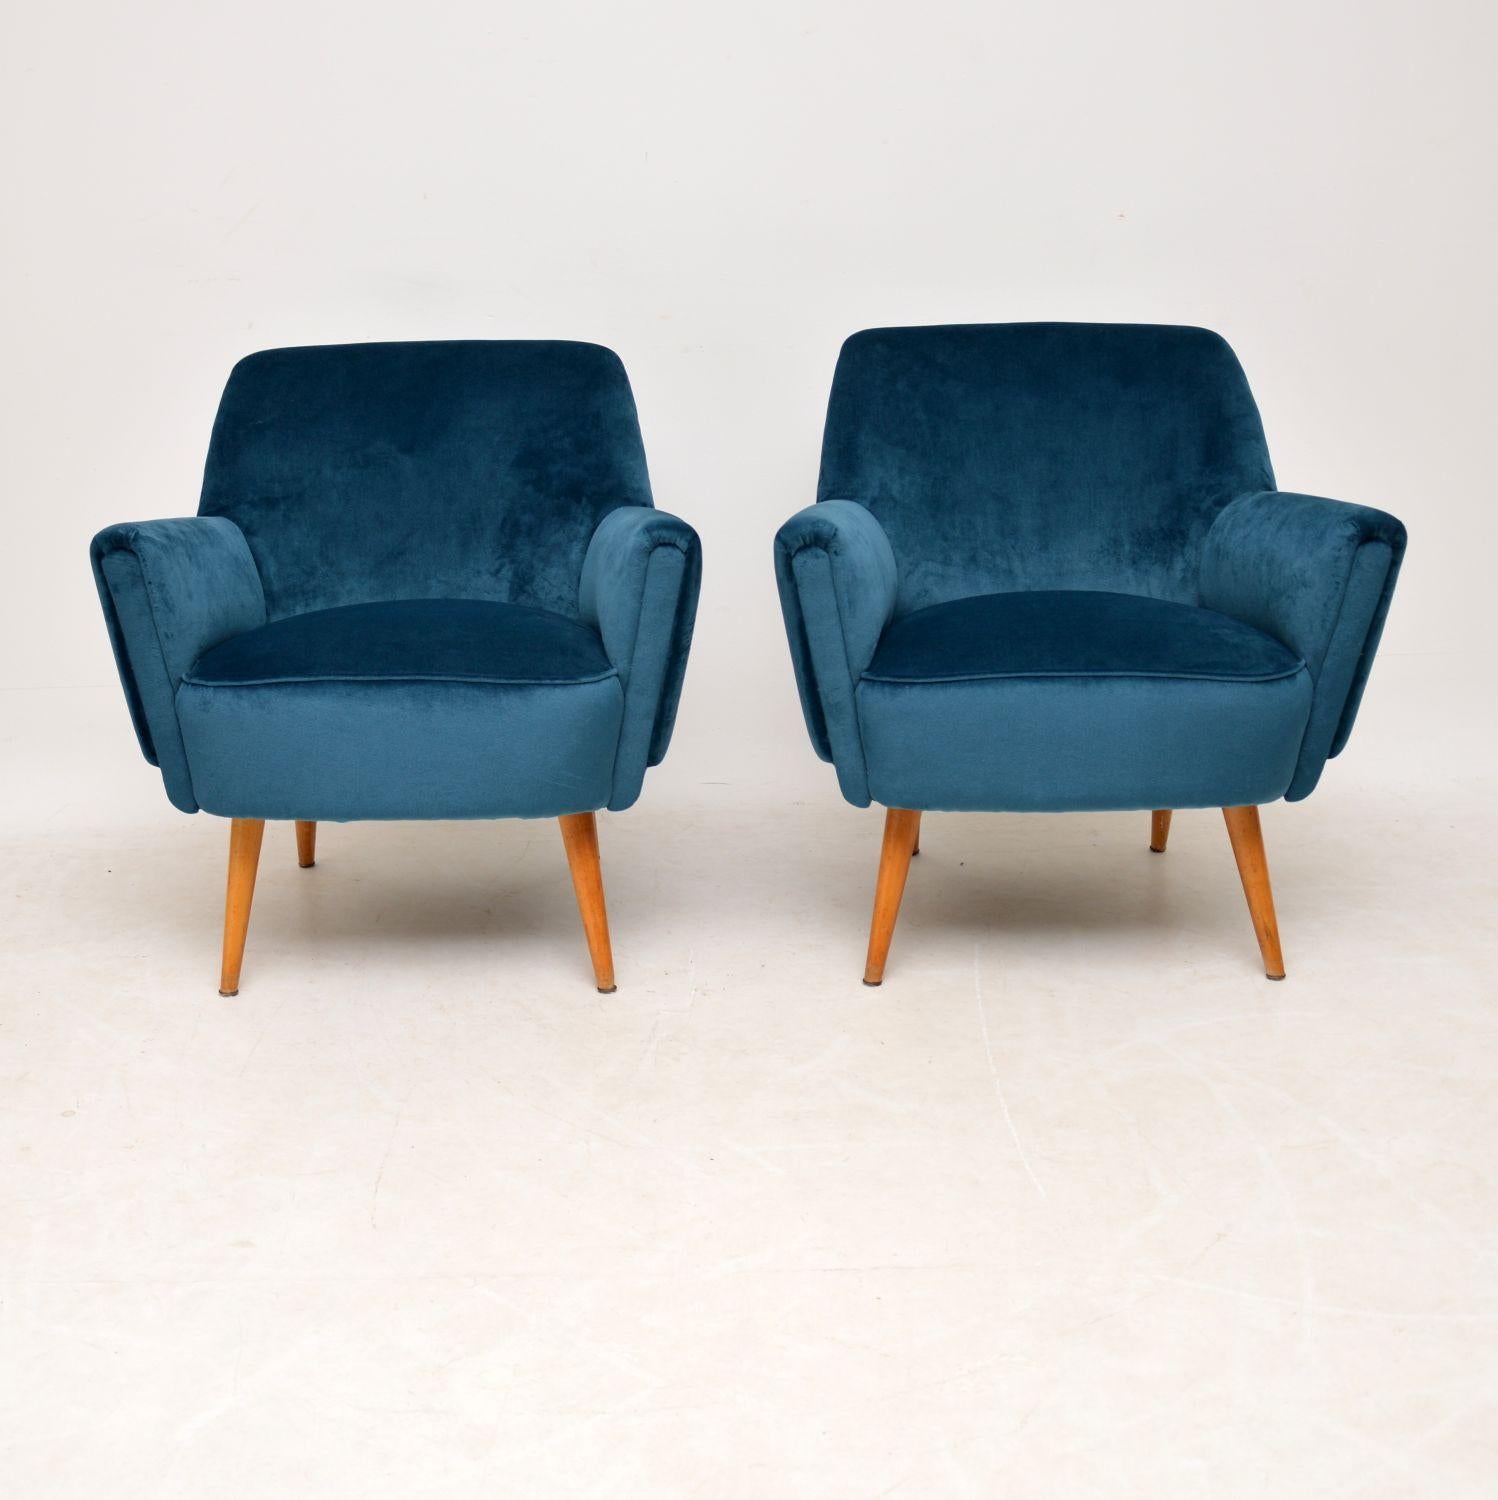 A stunning, top quality pair of vintage cocktail armchairs dating from the 1950s-1960s. Not to be confused with the many cheap, modern imitations available on the market! They have a beautiful shape and design, we have had these newly upholstered in